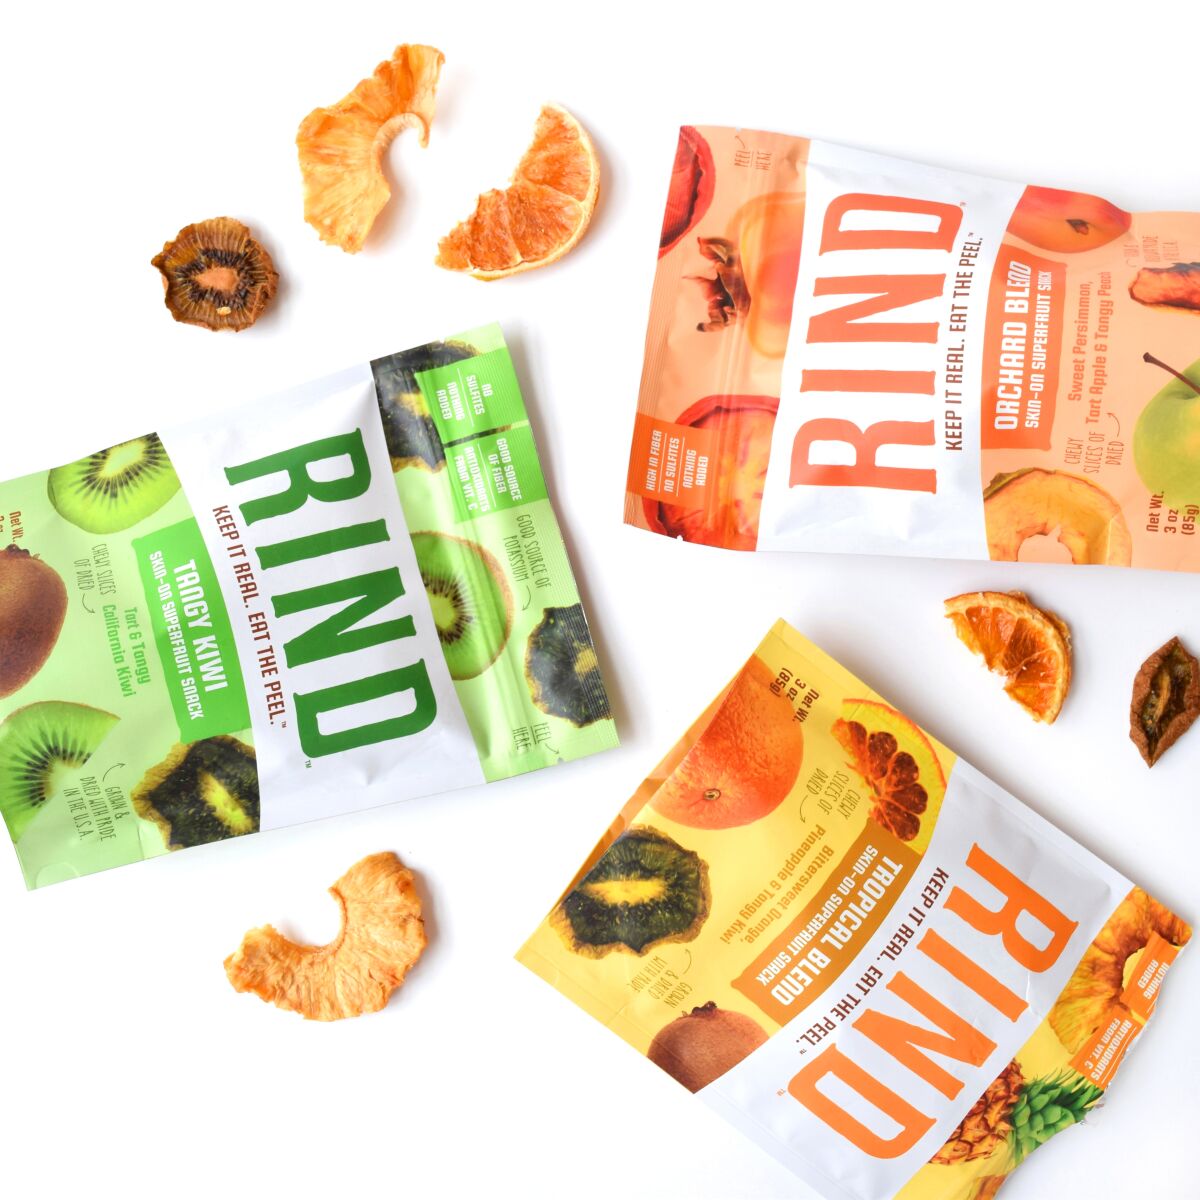 Rind: sun-dried fruits with the peel on.